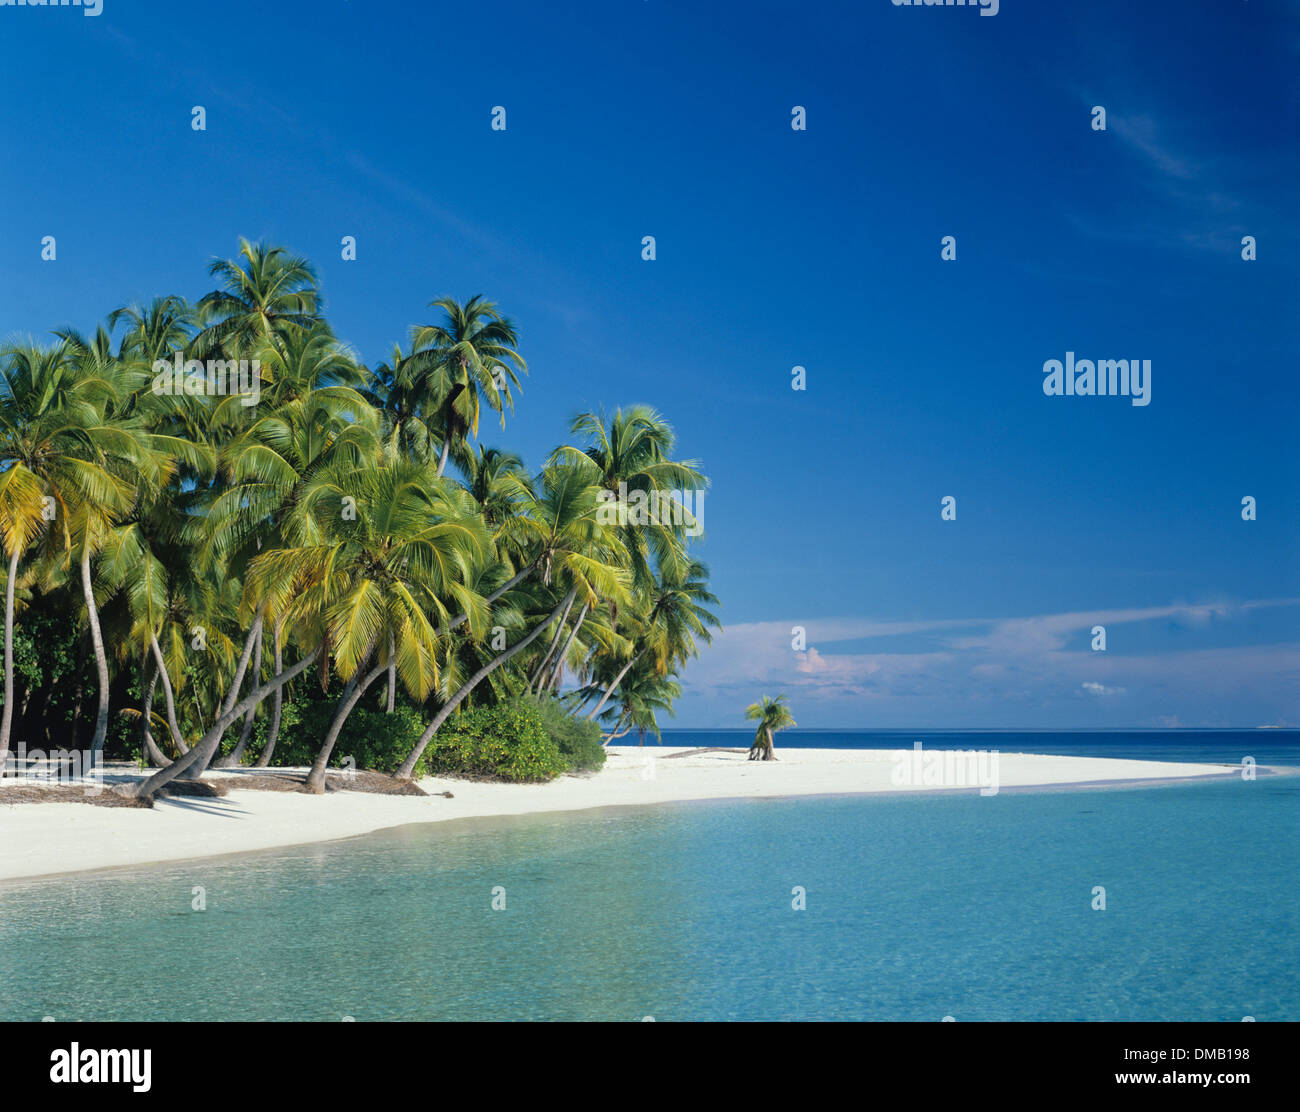 Holiday resort showing beach and palm trees, Maldives Stock Photo